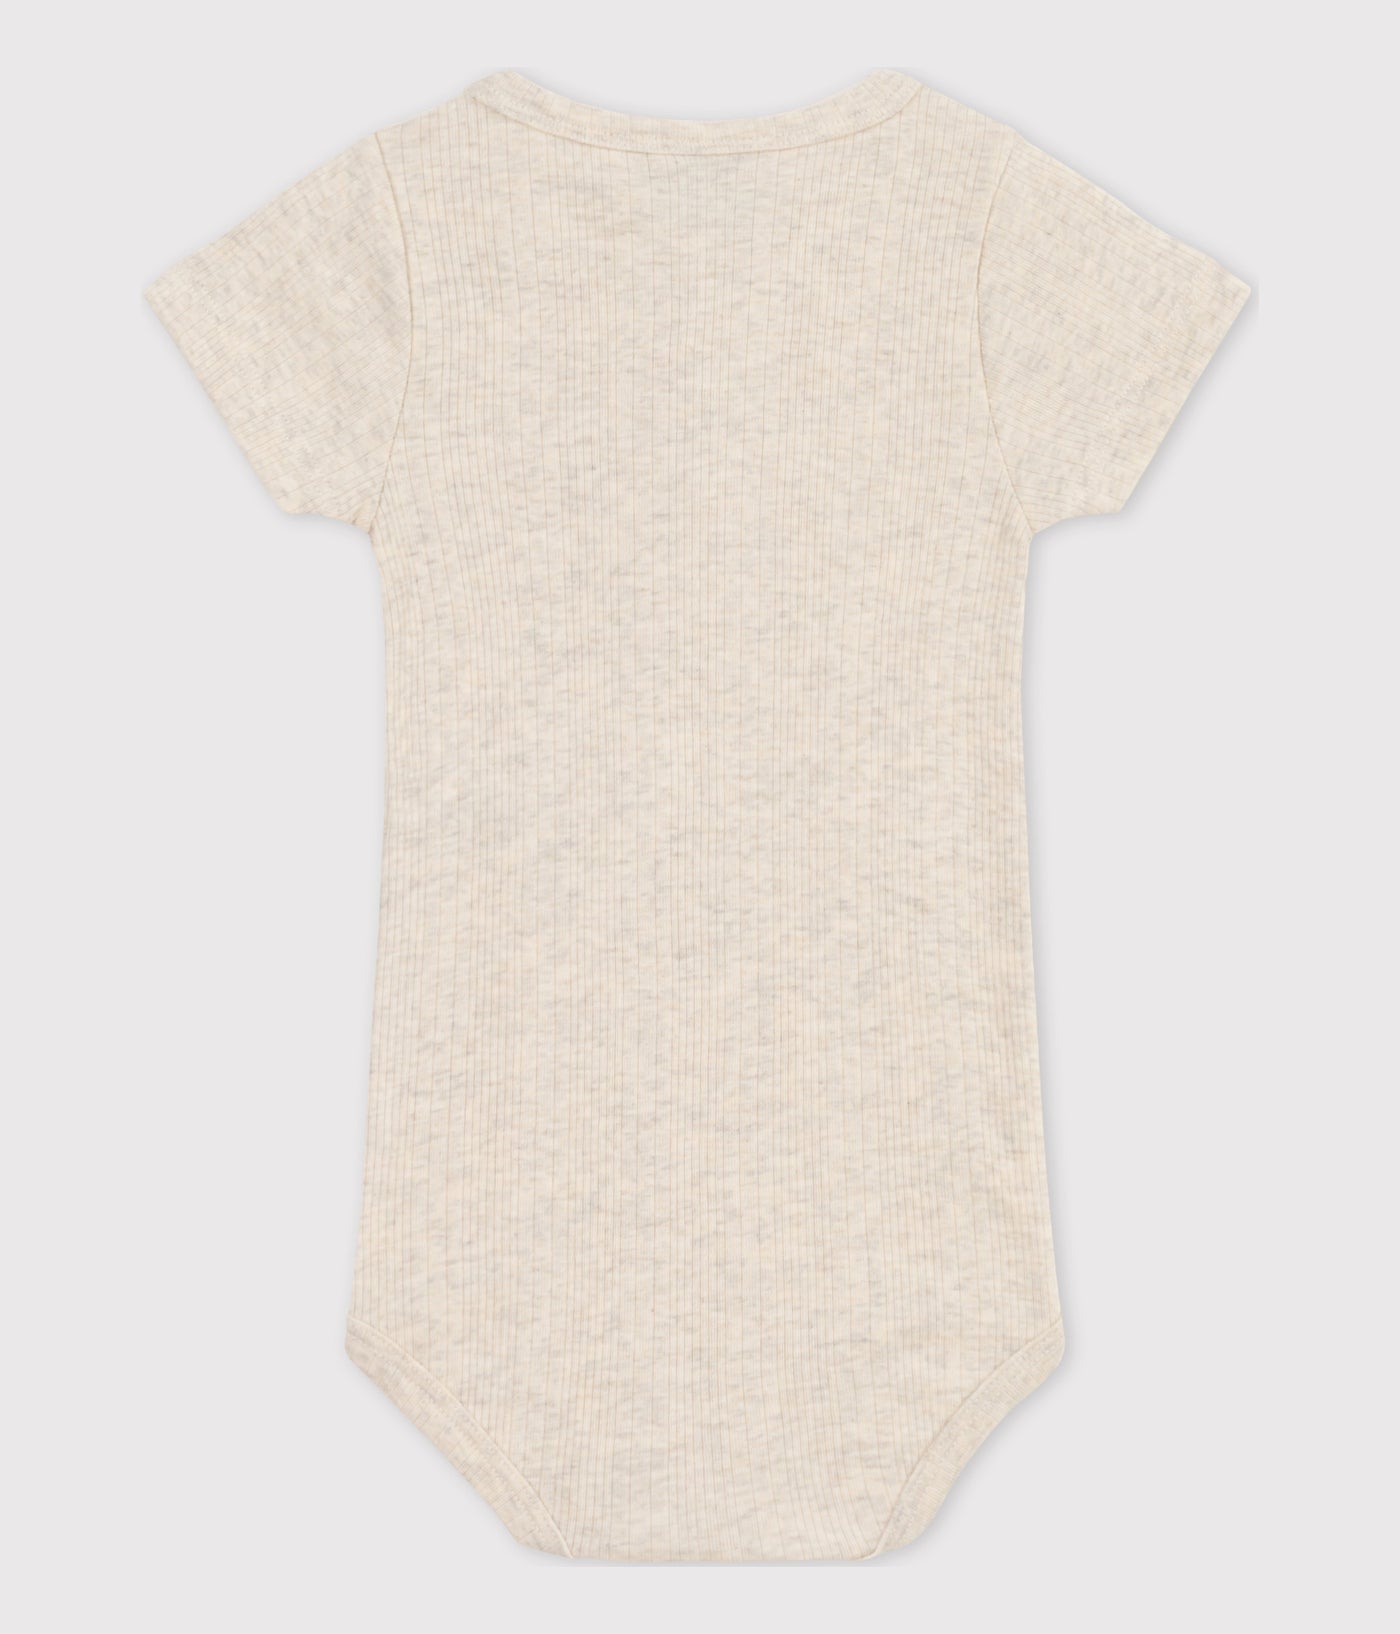 BABIES' SHORT-SLEEVED COTTON BODYSUIT WITH HENLEY NECK